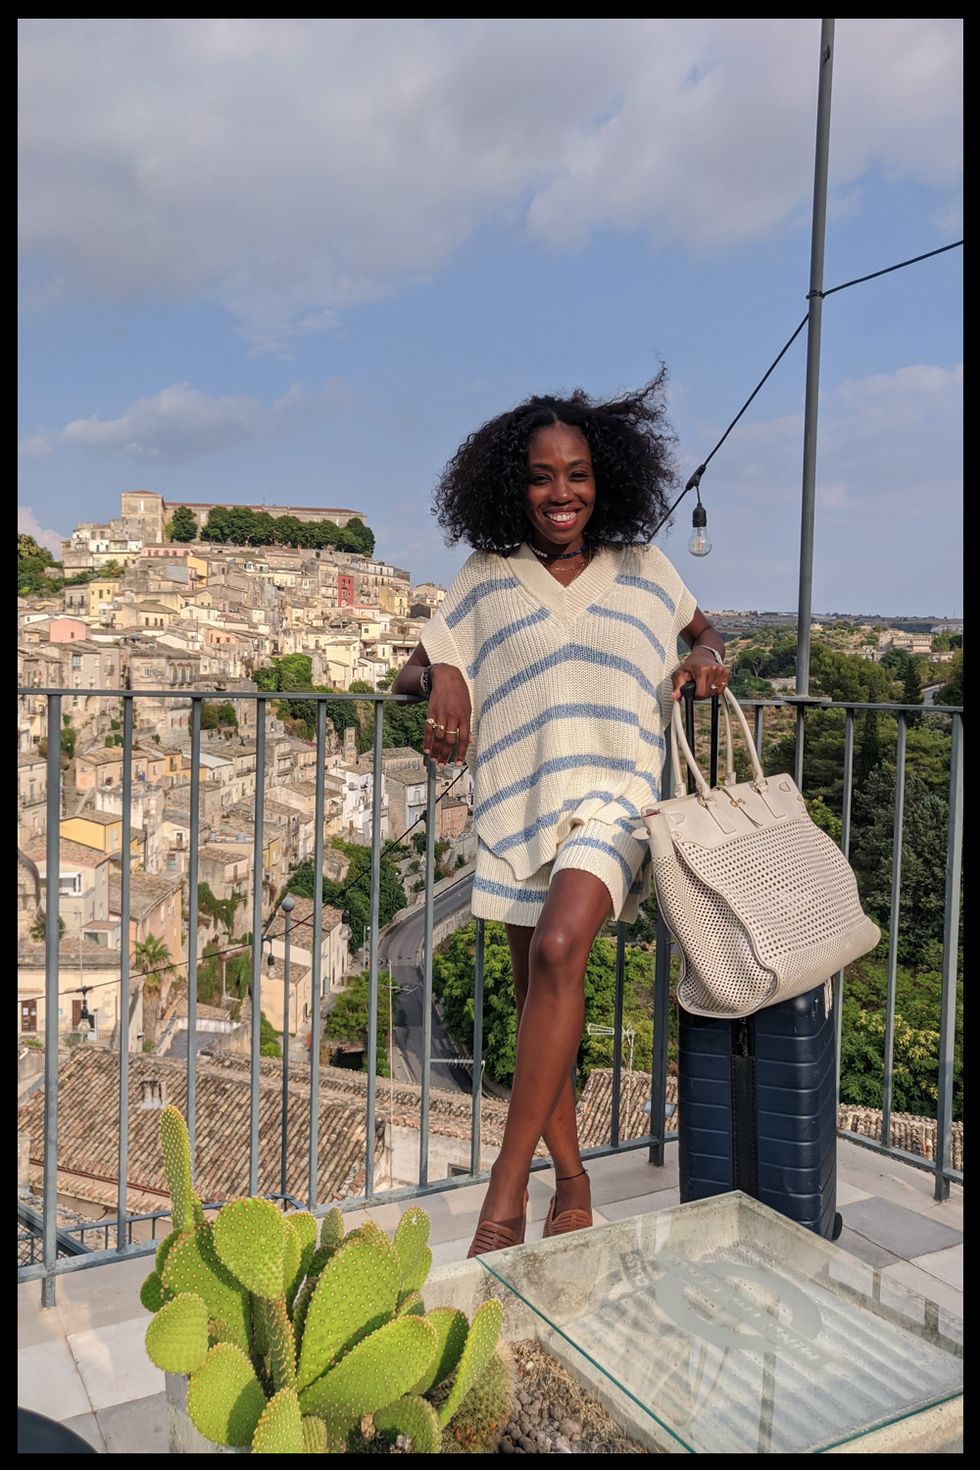 nneya richards carries a ferregamo bag and away suitcase in italy